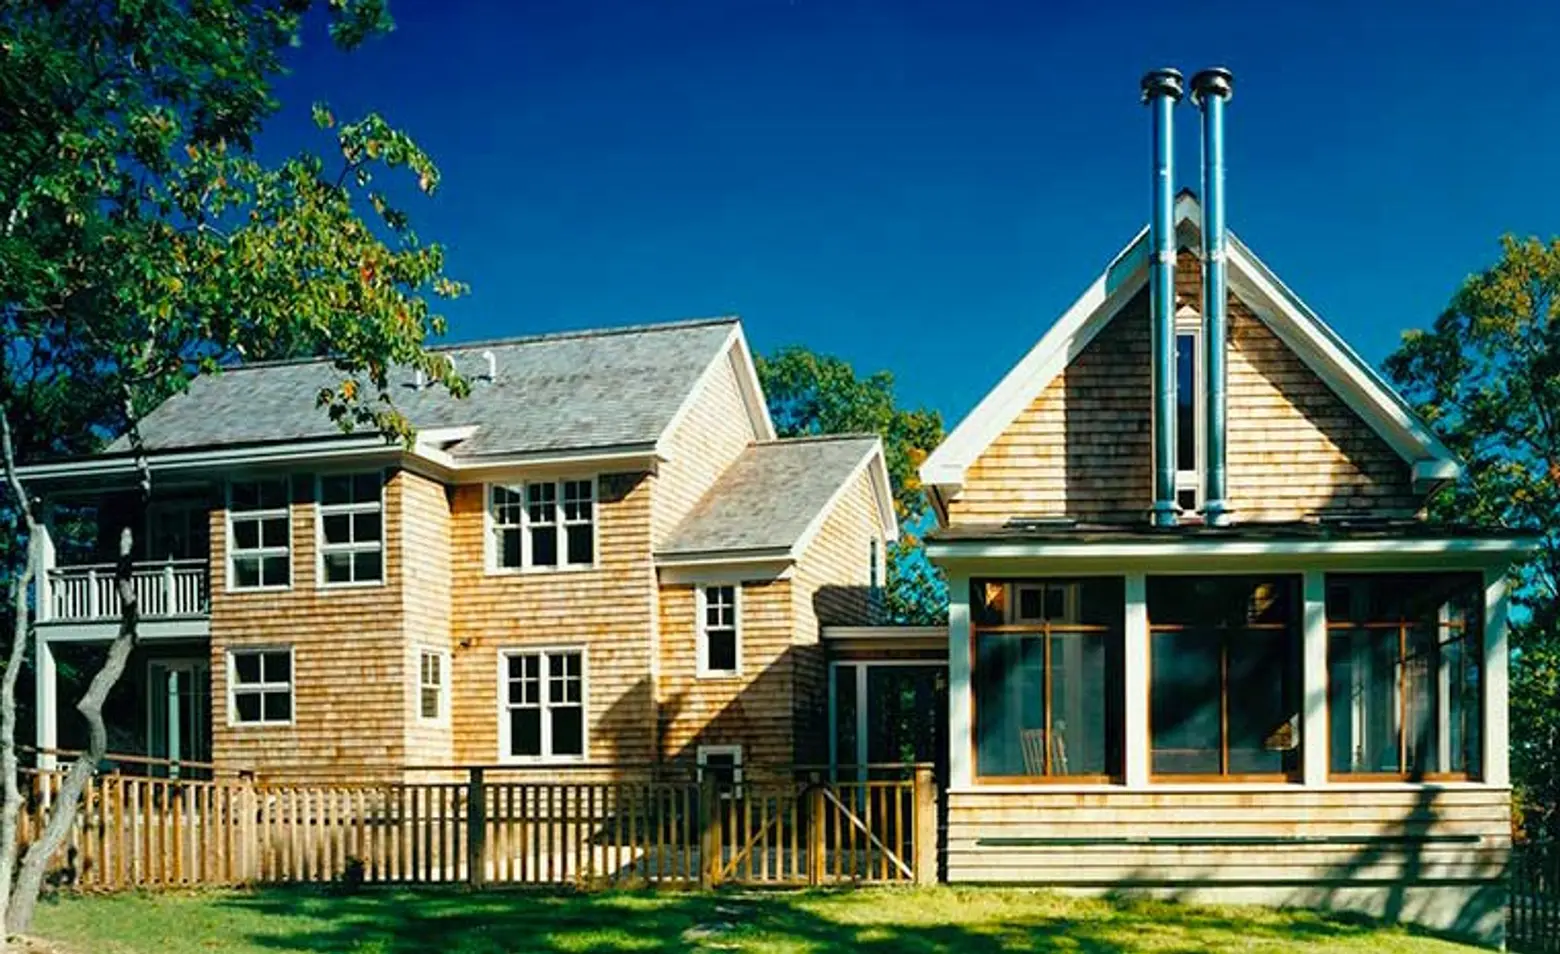 Designing This Shingle-Style Home in East Hampton Was a Family Affair for a Young Architect